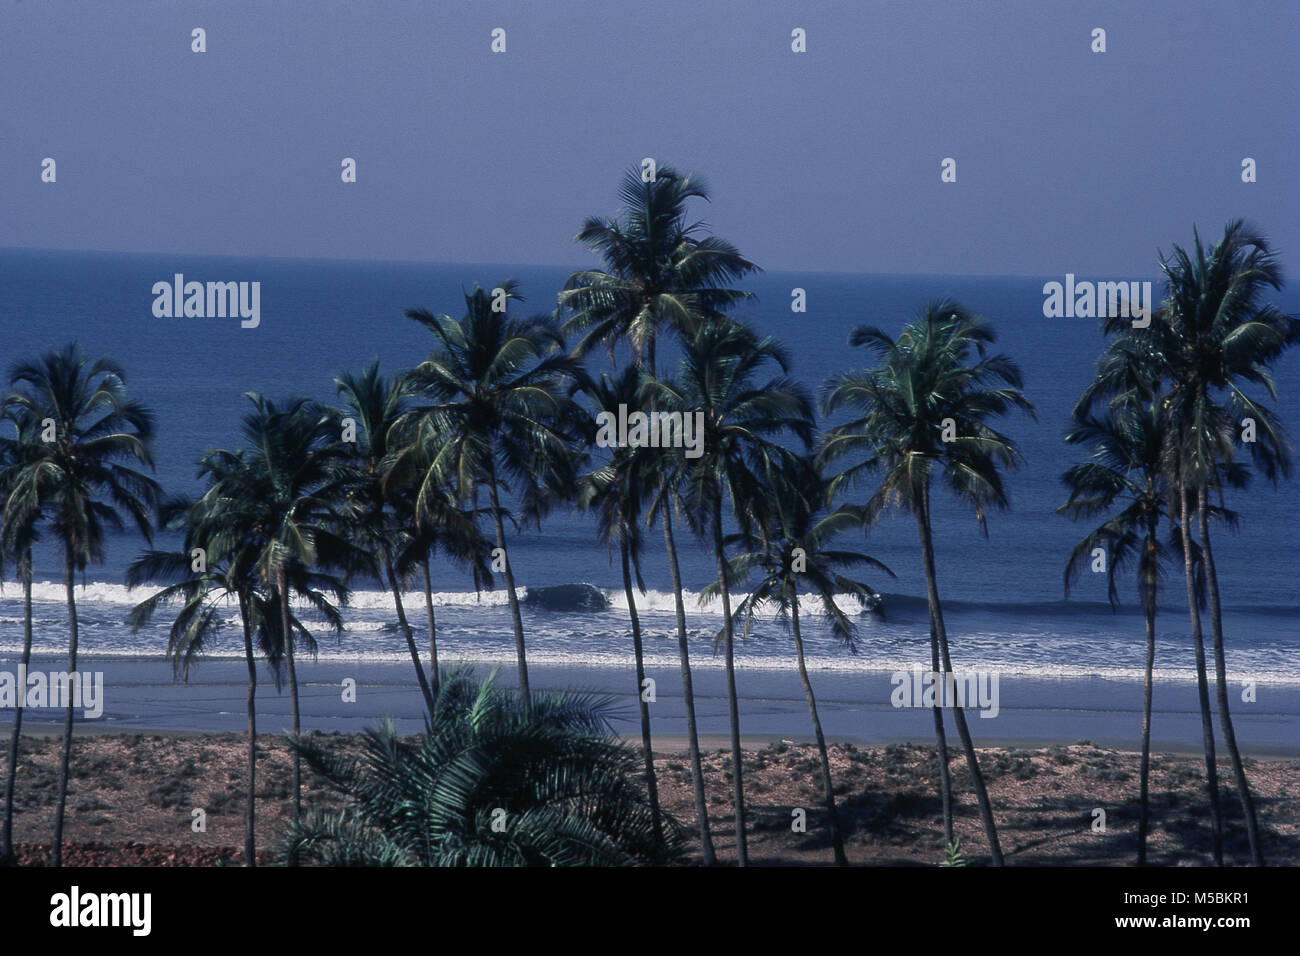 View of palm trees on harmal beach in Goa, India Stock Photo